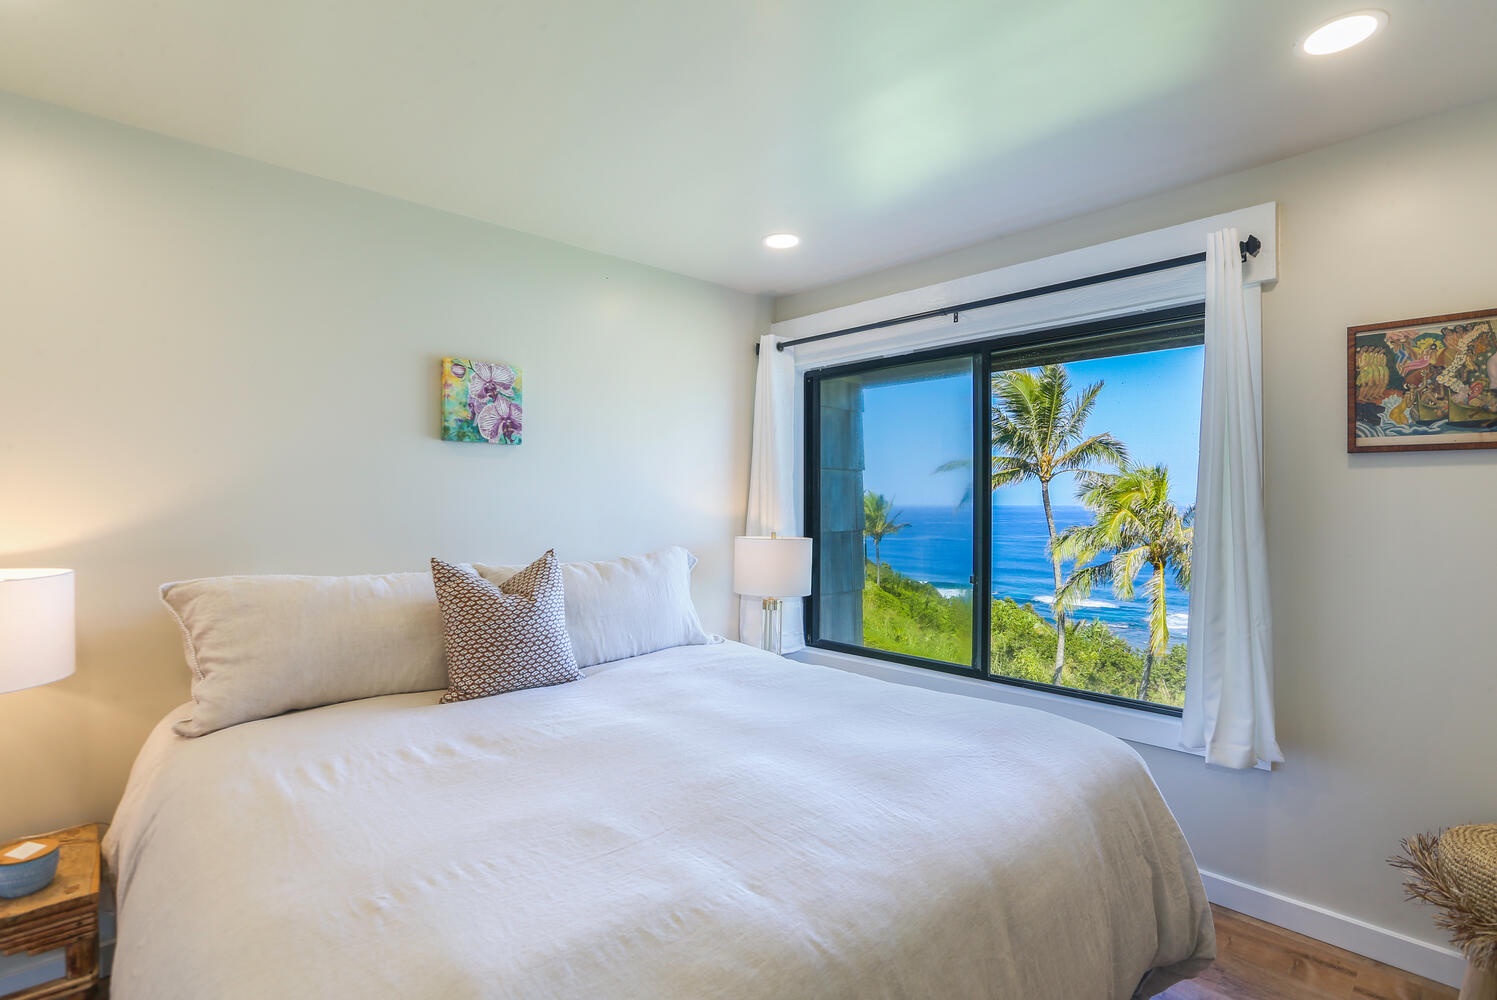 Princeville Vacation Rentals, Sealodge J8 - Guest a good night's rest and wake up to this beautiful view